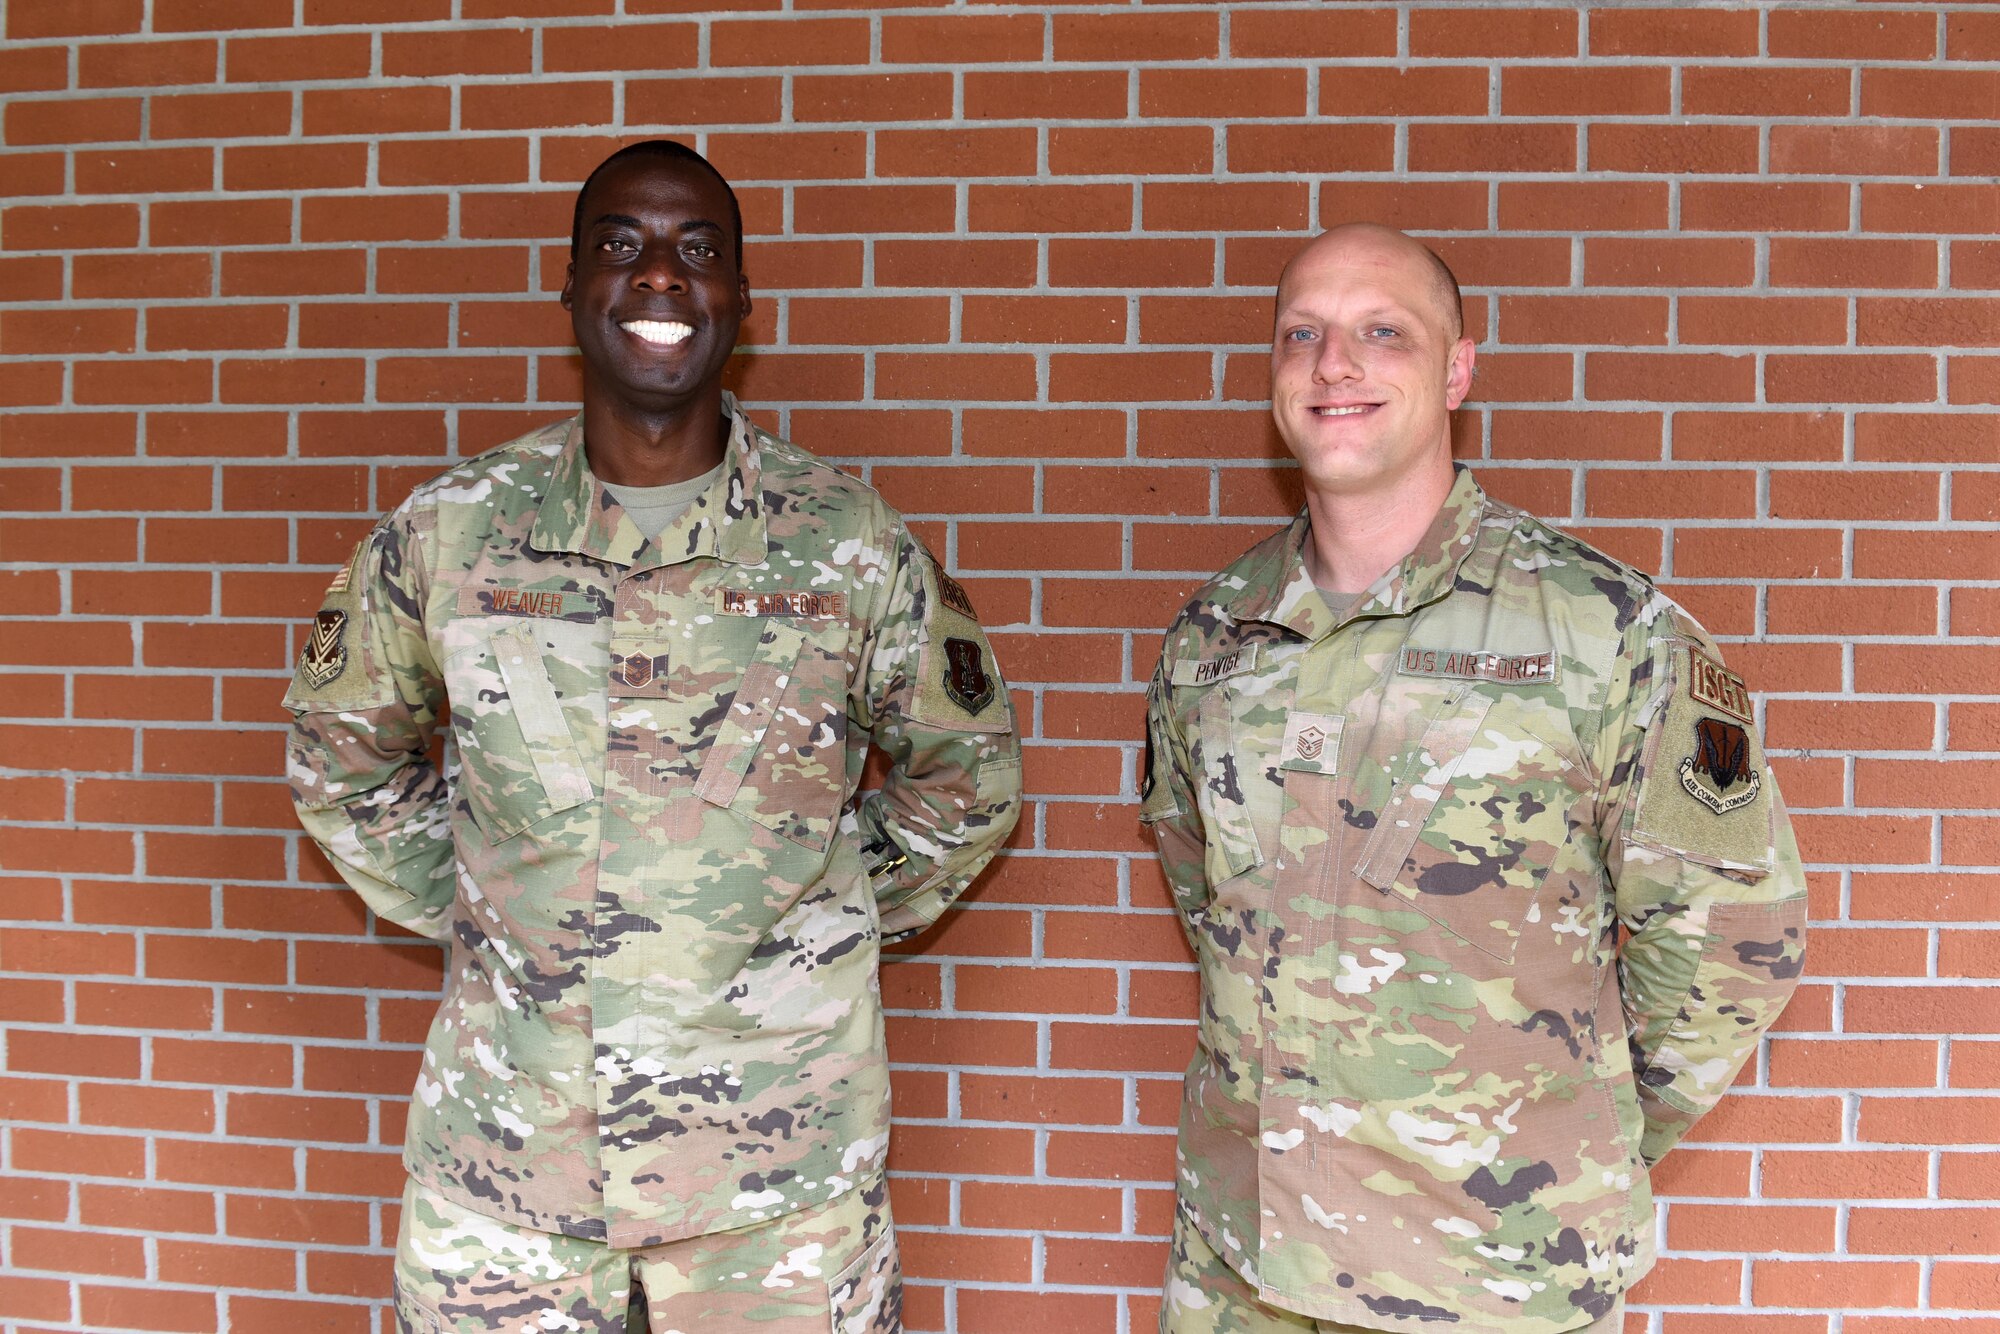 Photo shows two Airmen standing in front of brick wall.